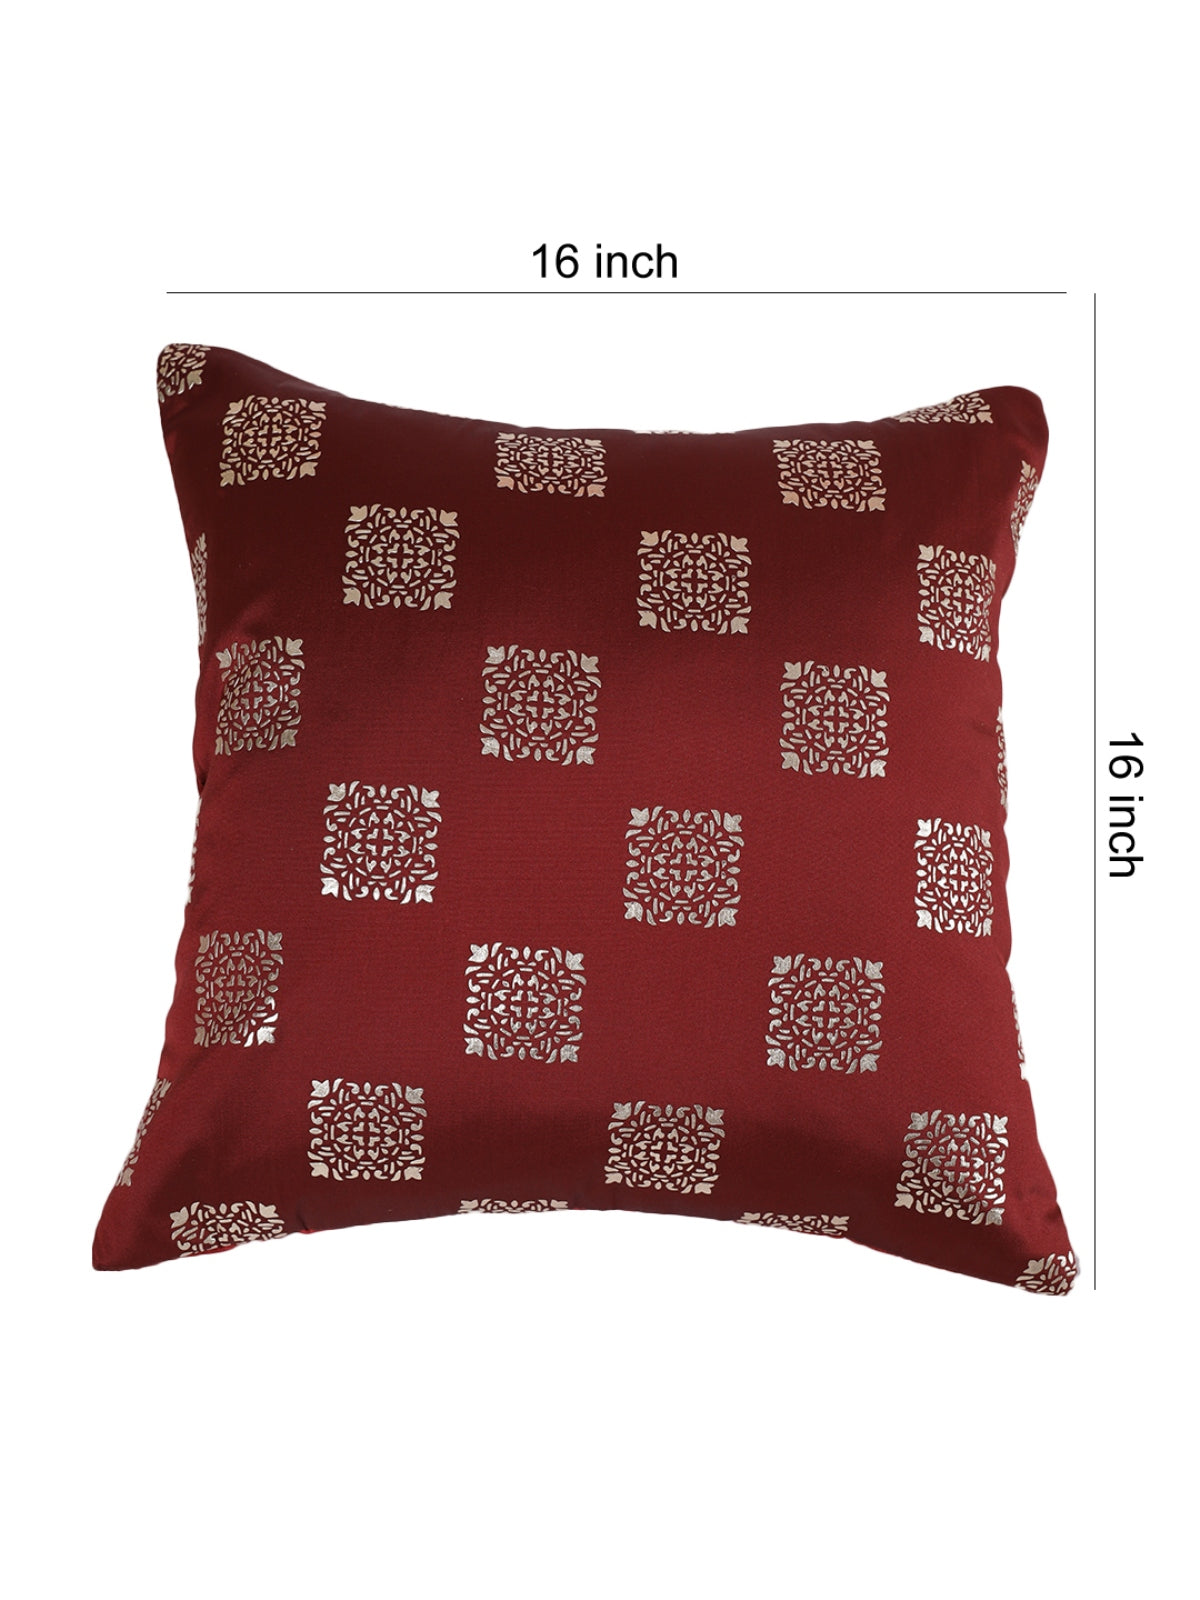 Polyester Ethnic Motifs Design Cushion Covers 16x16 Inches, Set of 5 - Maroon